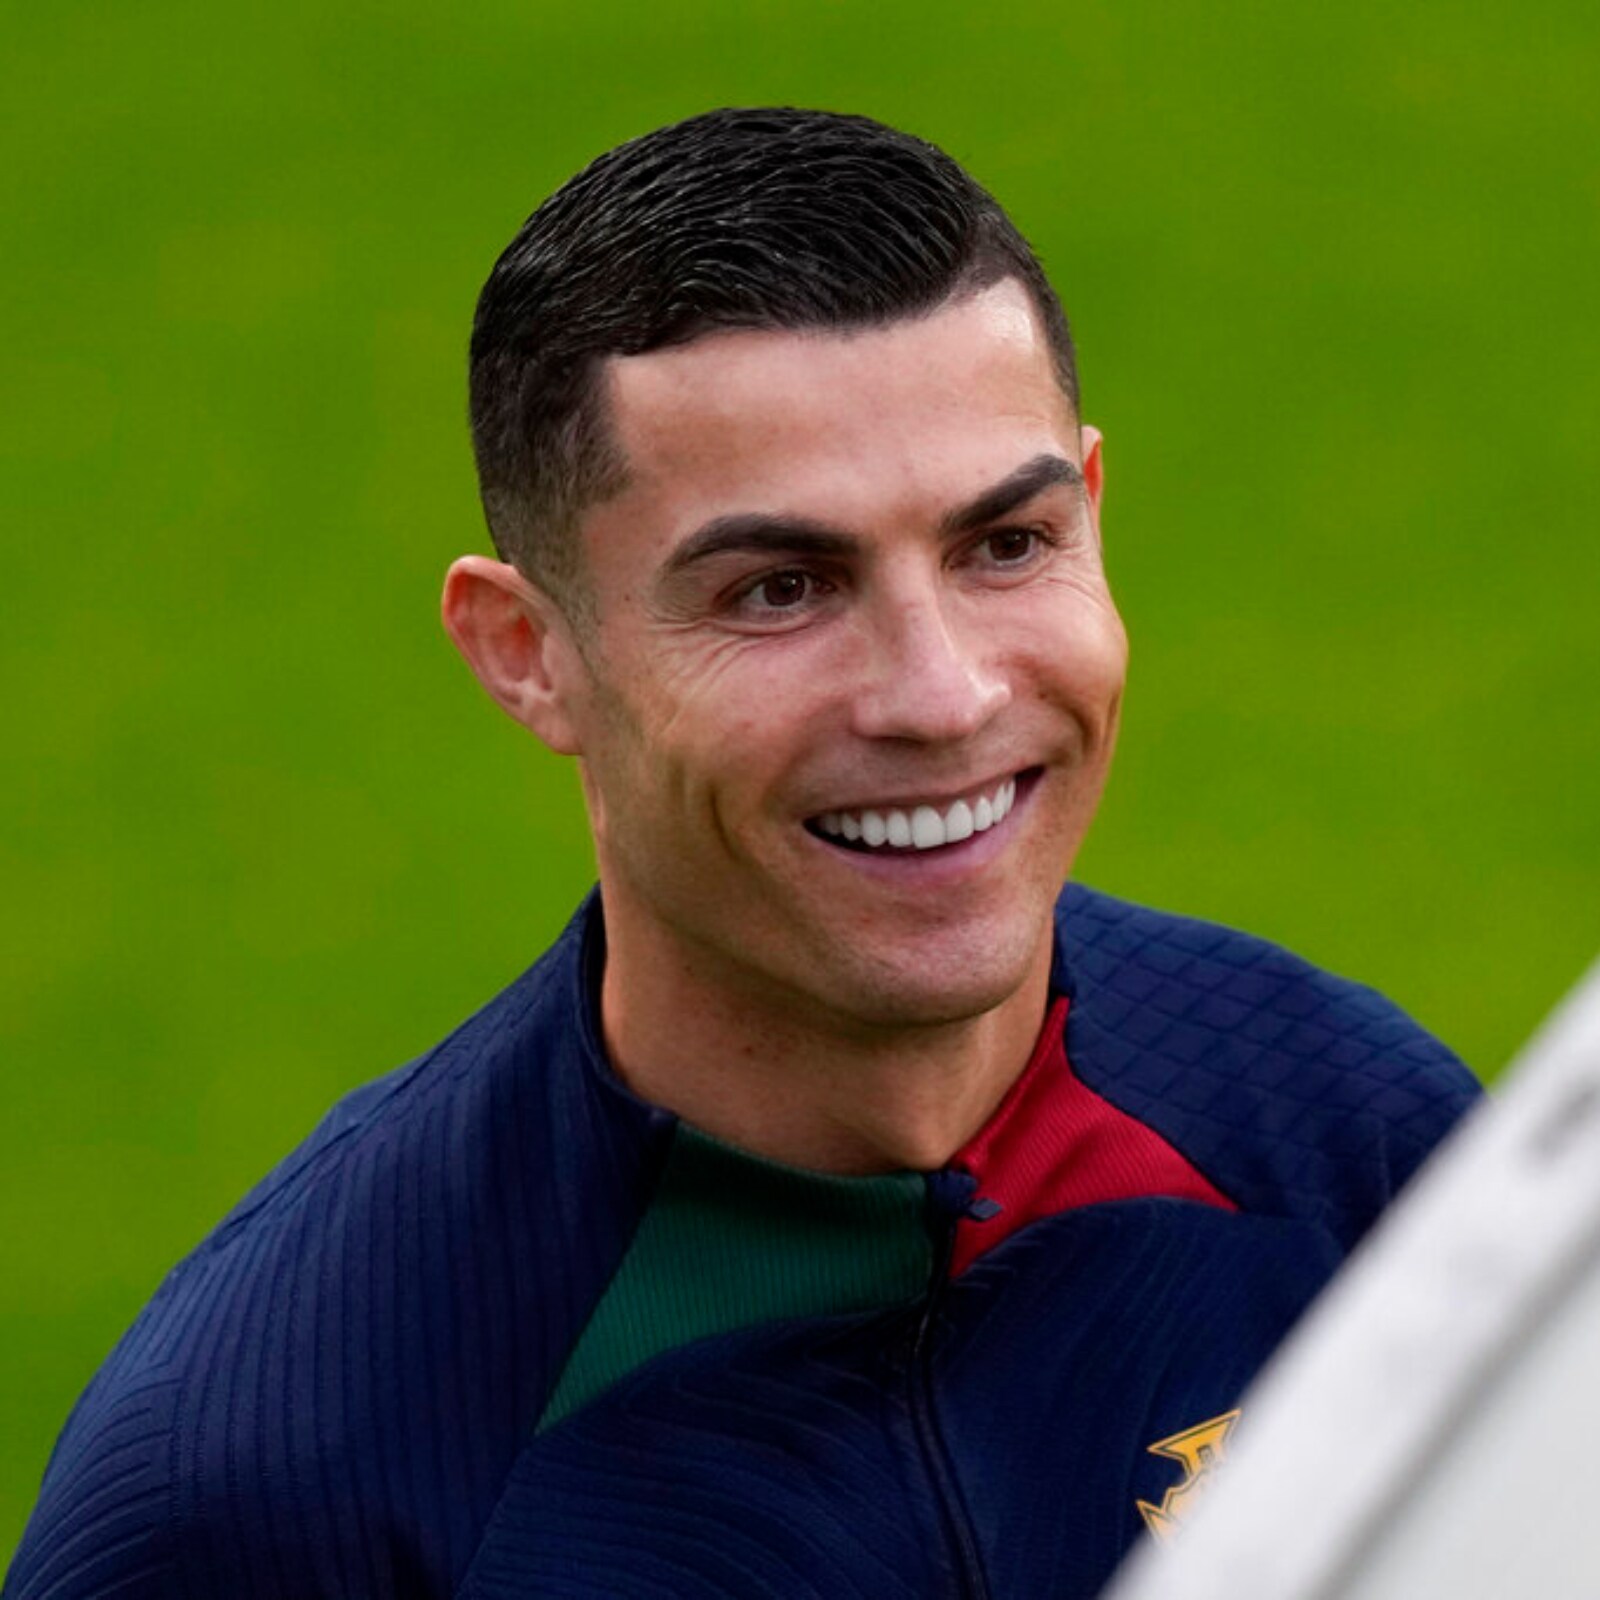 Cristiano Ronaldo's Al-Nassr teammate speaks about CR7 being named captain,  taking his No. 7 jersey